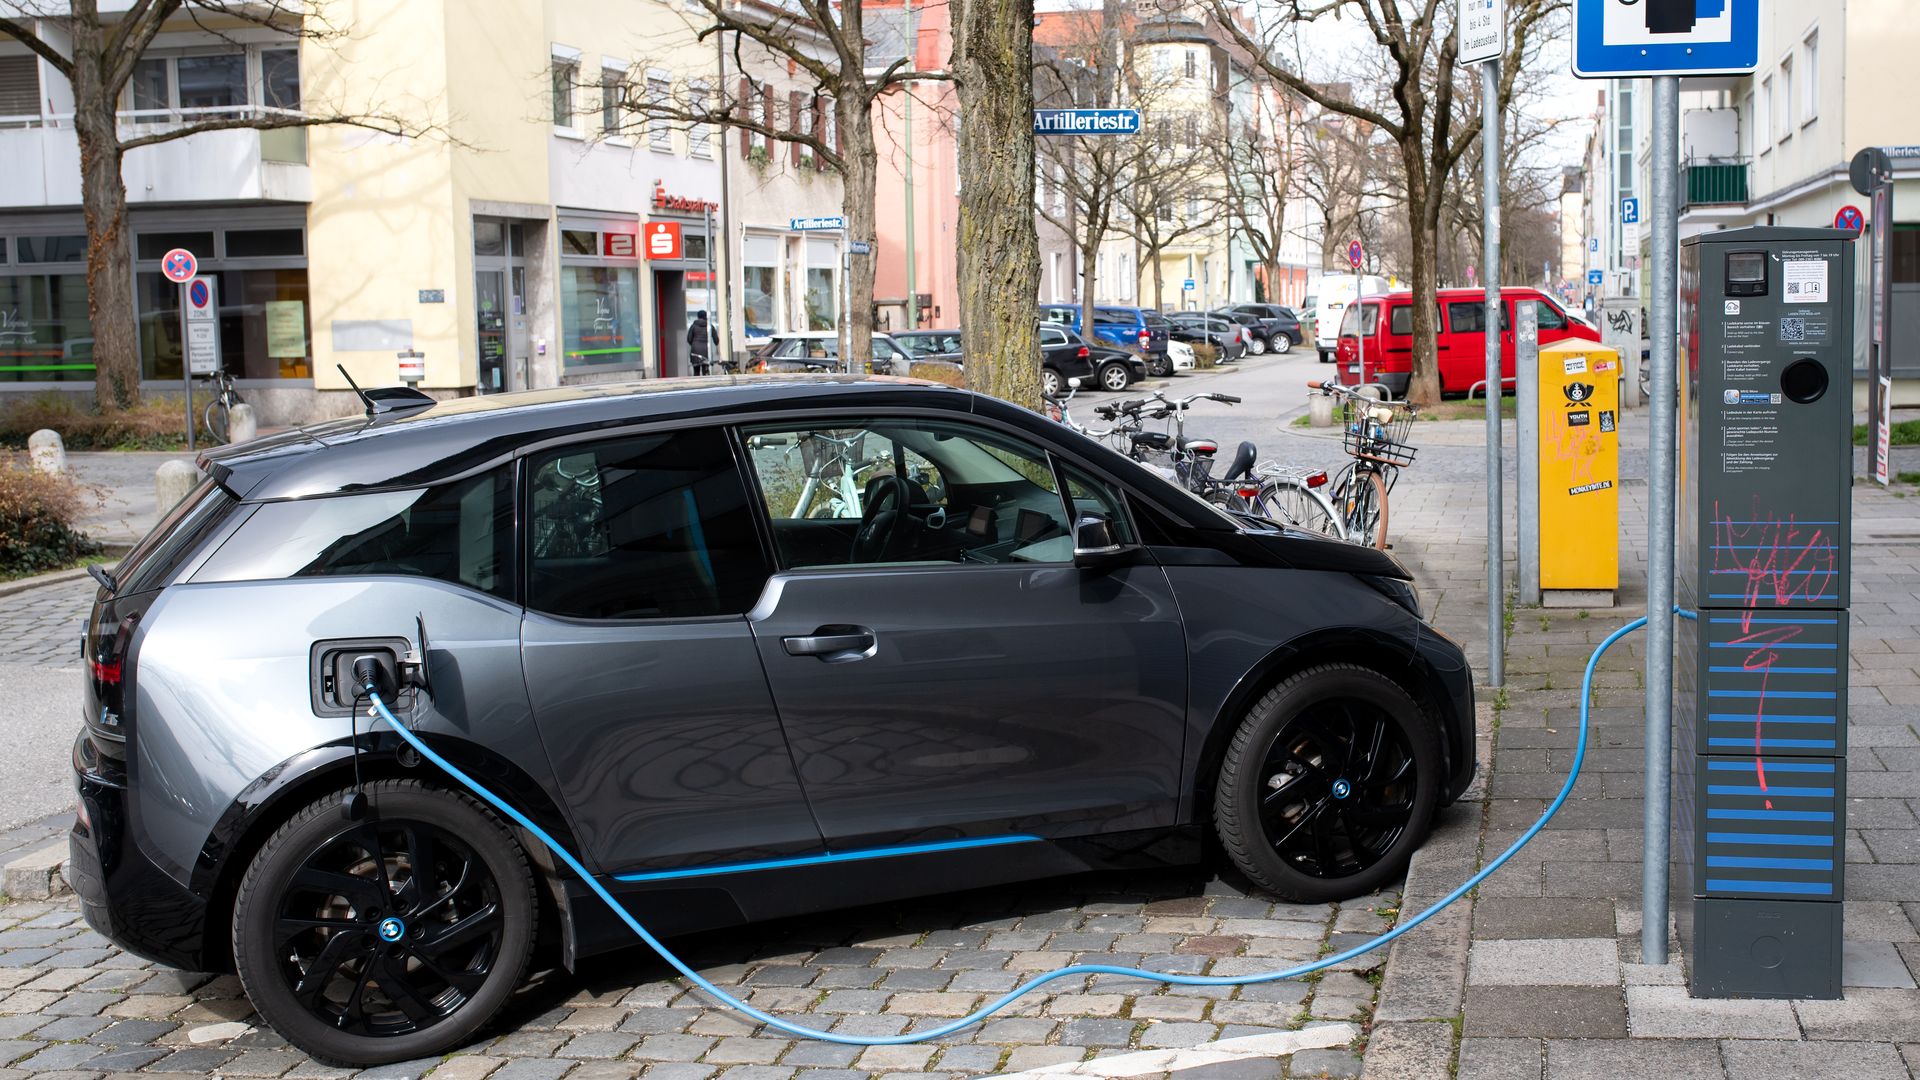 n electric car (BMW I3) is charged at a charging station.